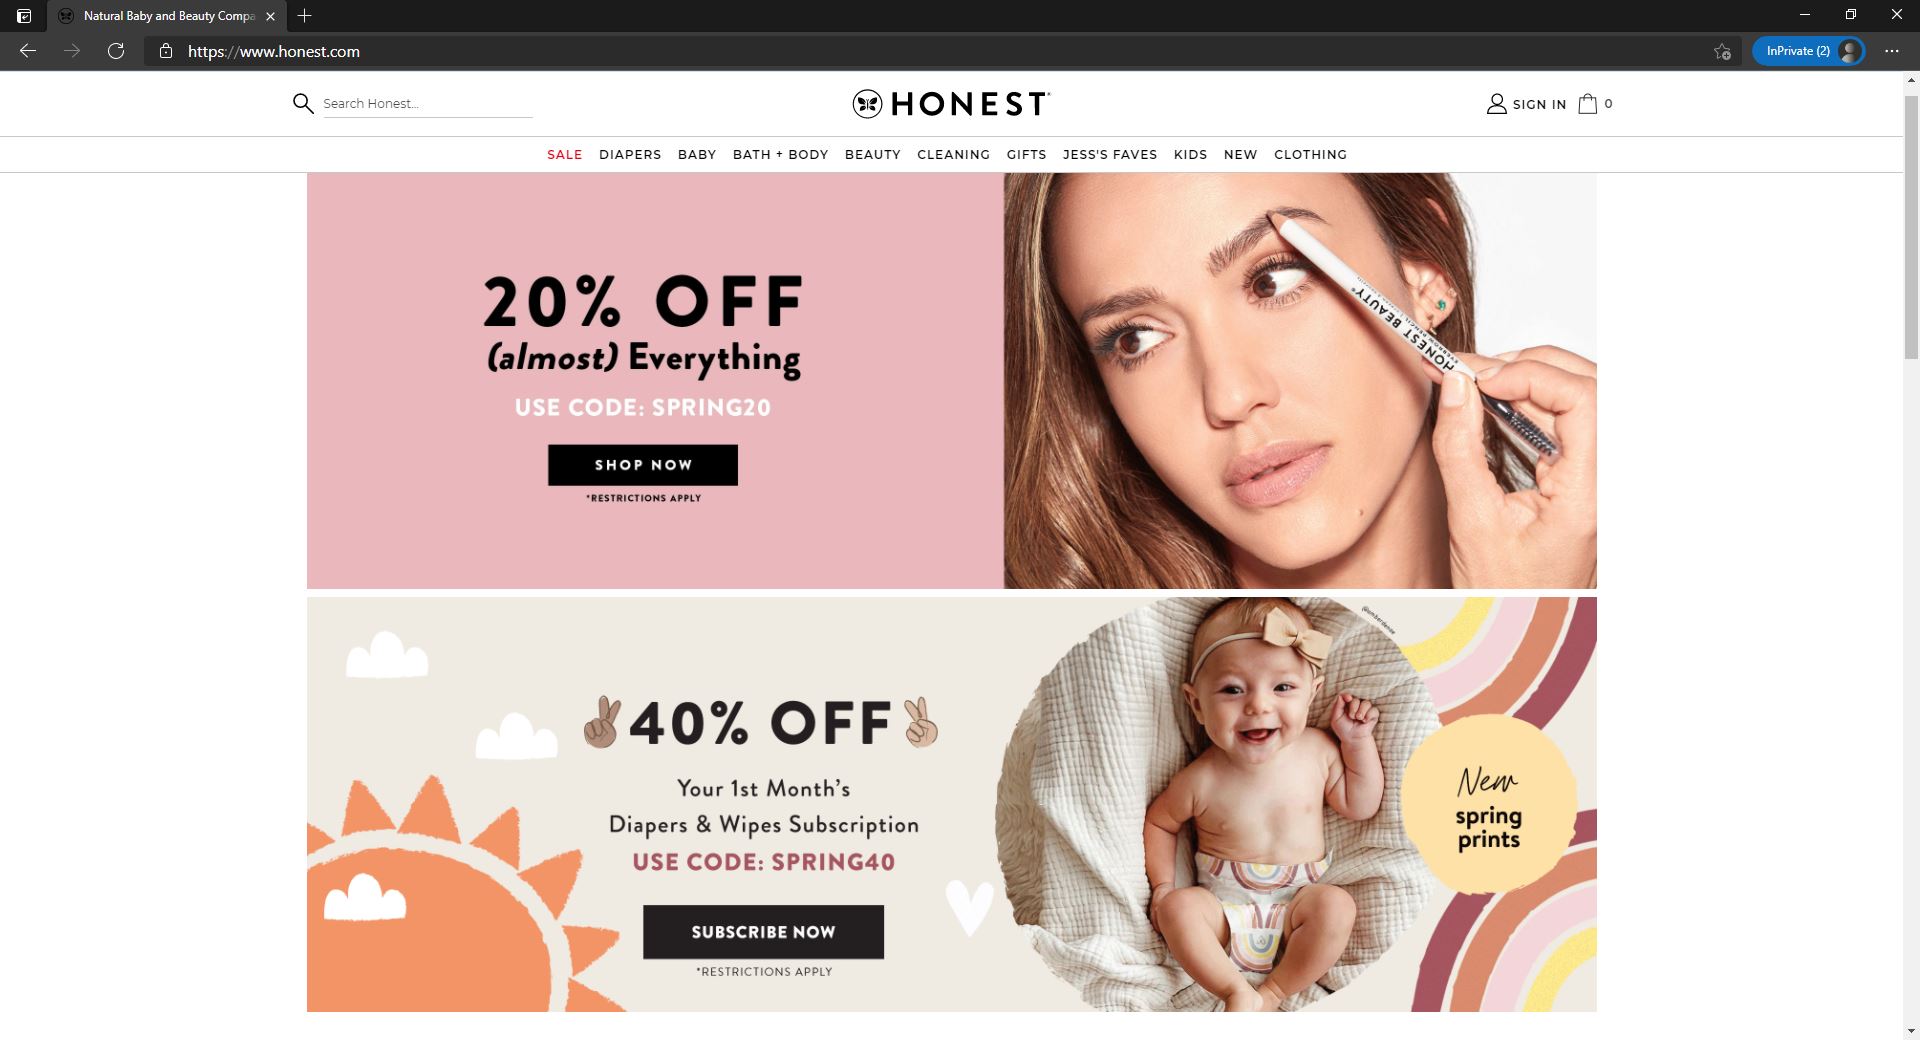 The Honest Company website homepage